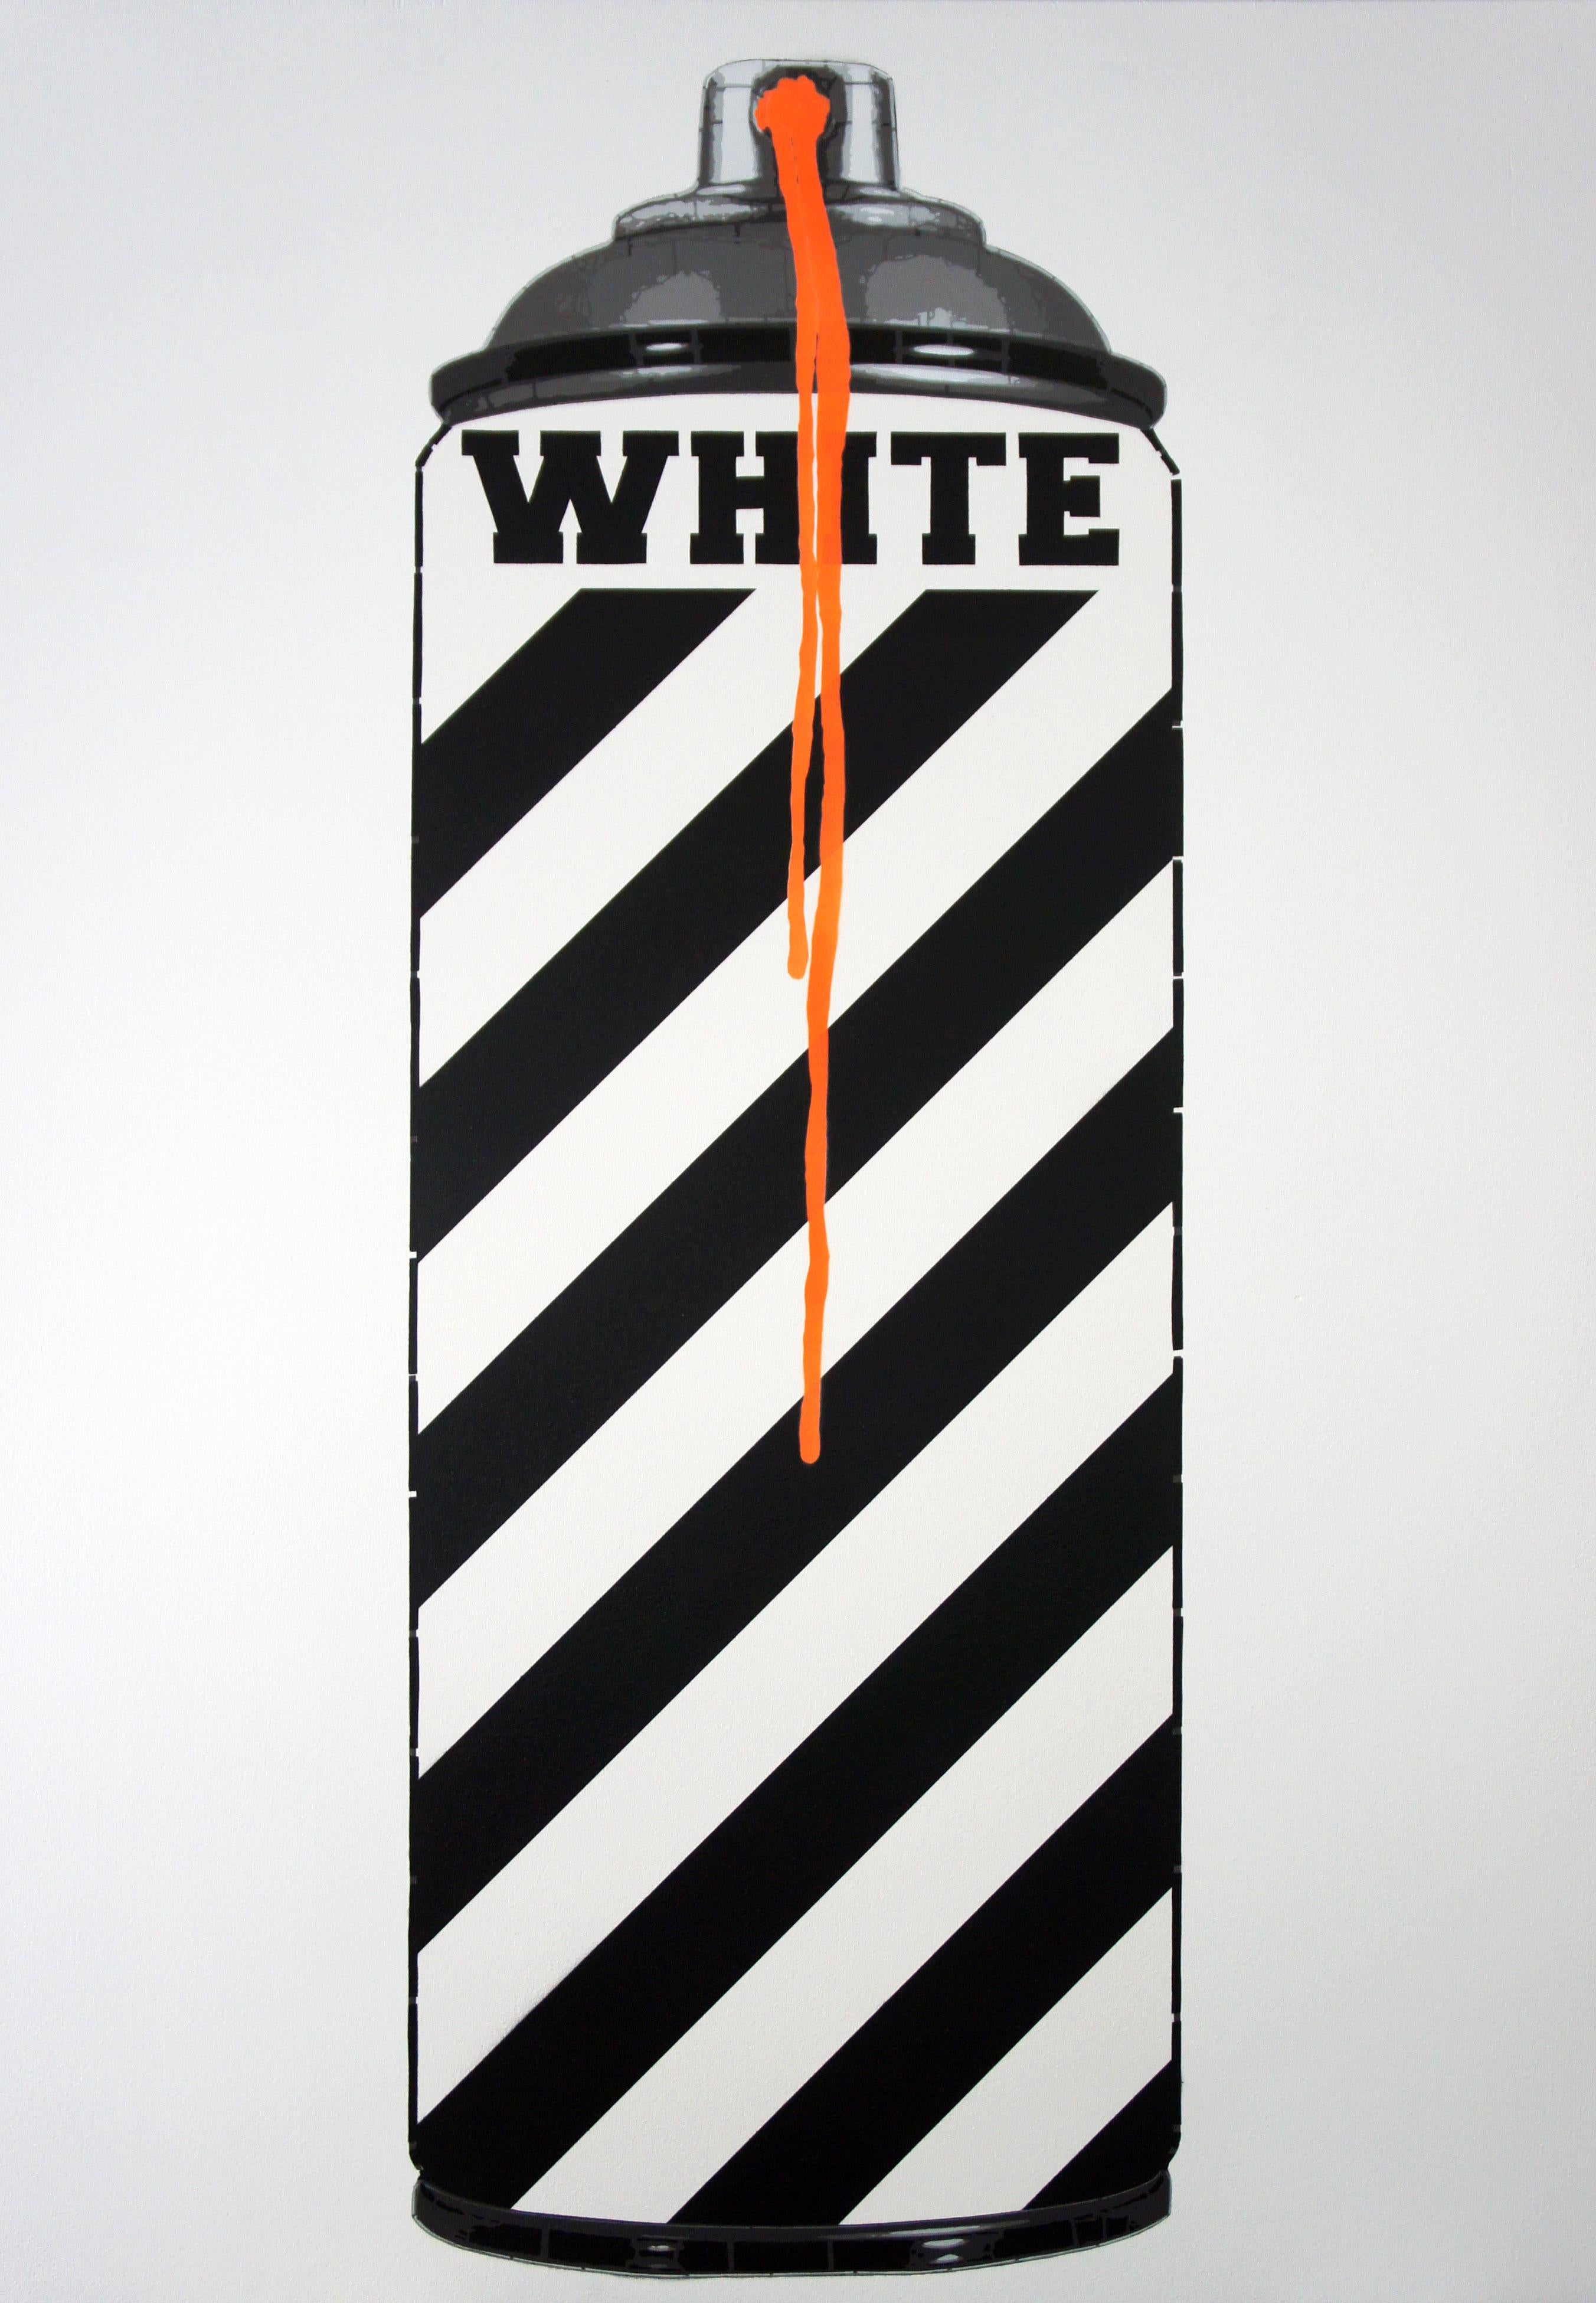 Off White Quattro - Painting by Campbell la Pun